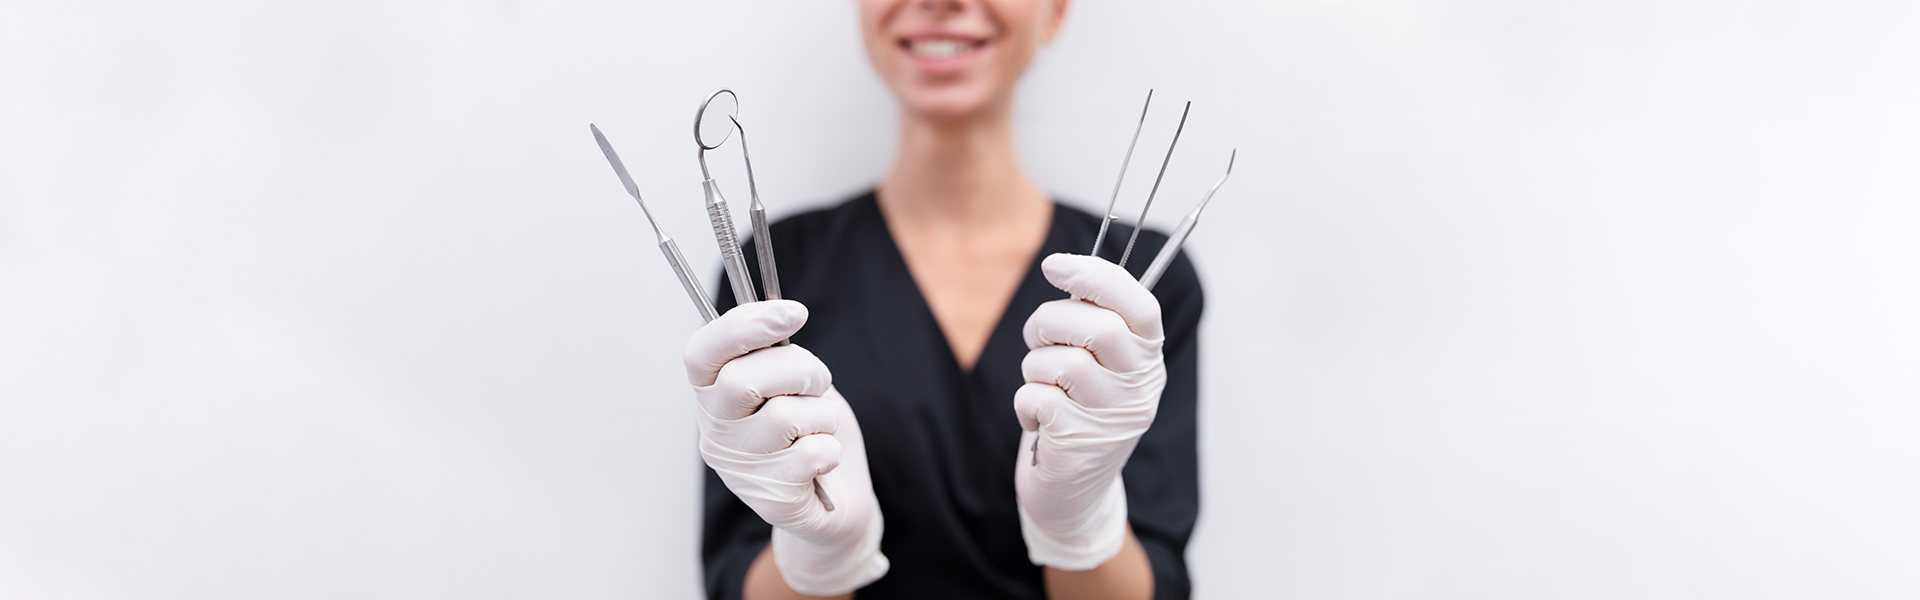 How Often Should I Have Dental Exam and Cleaning?